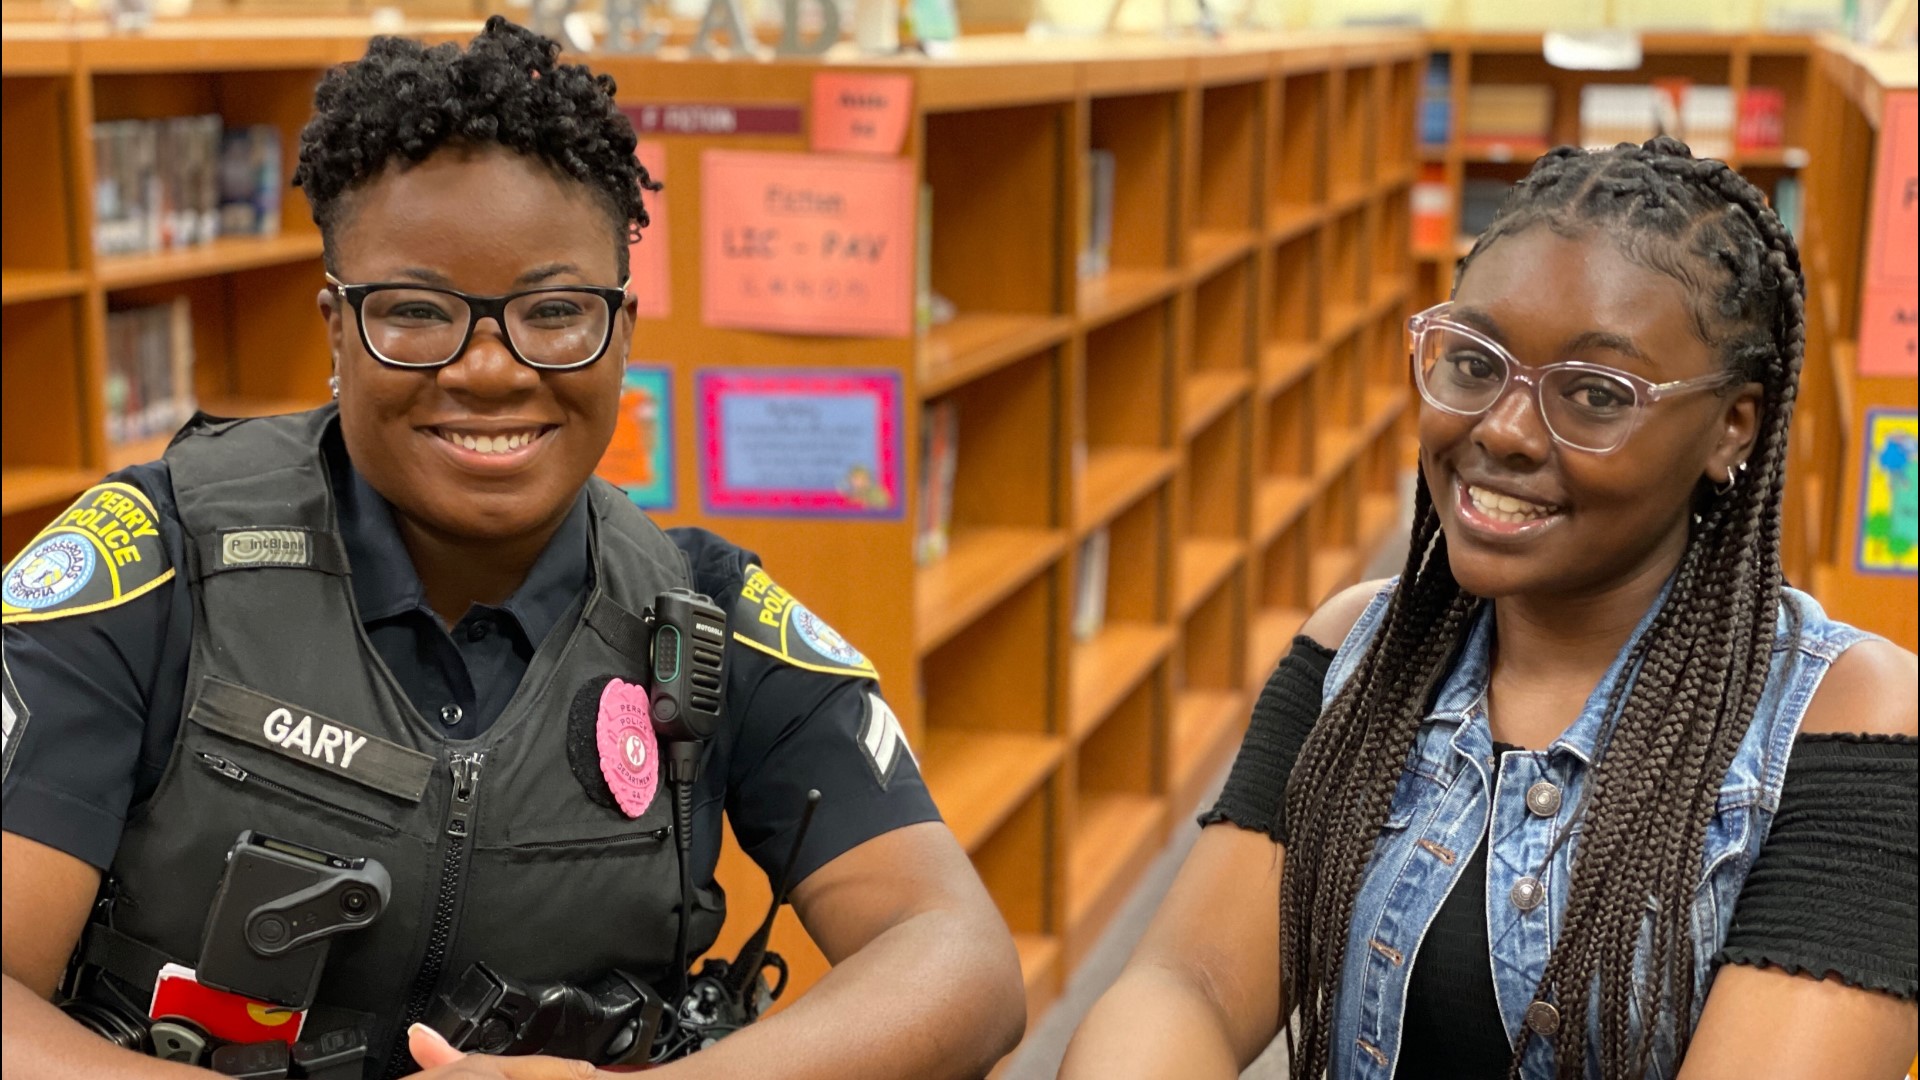 Perry Police Officer Eddrica Gary is making a difference in the lives of students in Houston County.